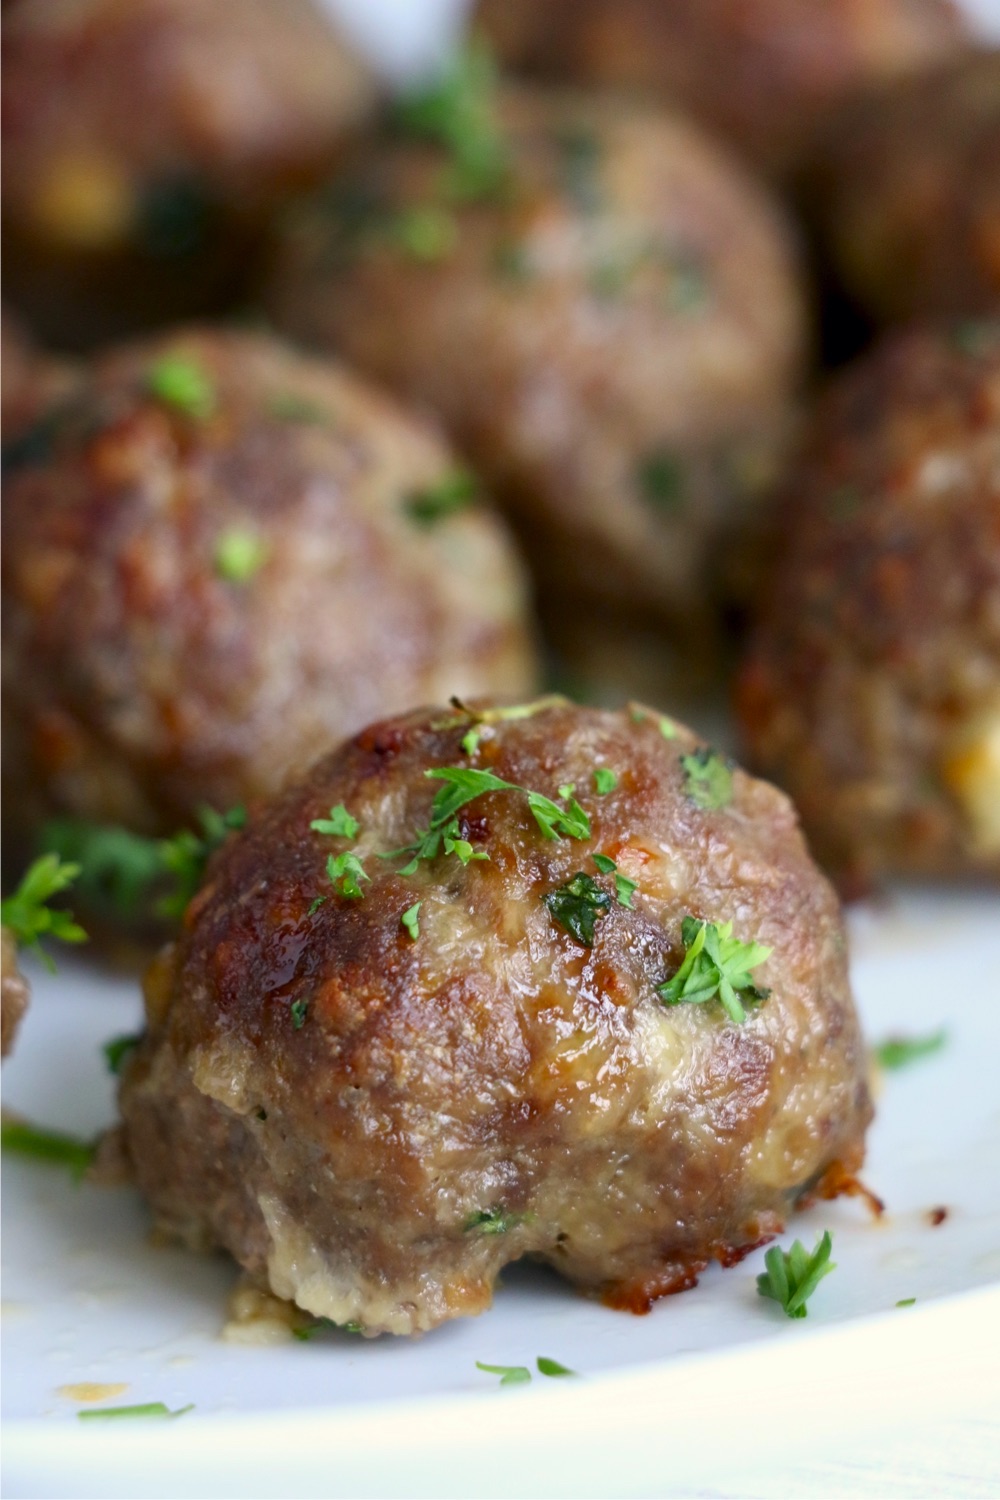 close up of meatball with parsley garnish